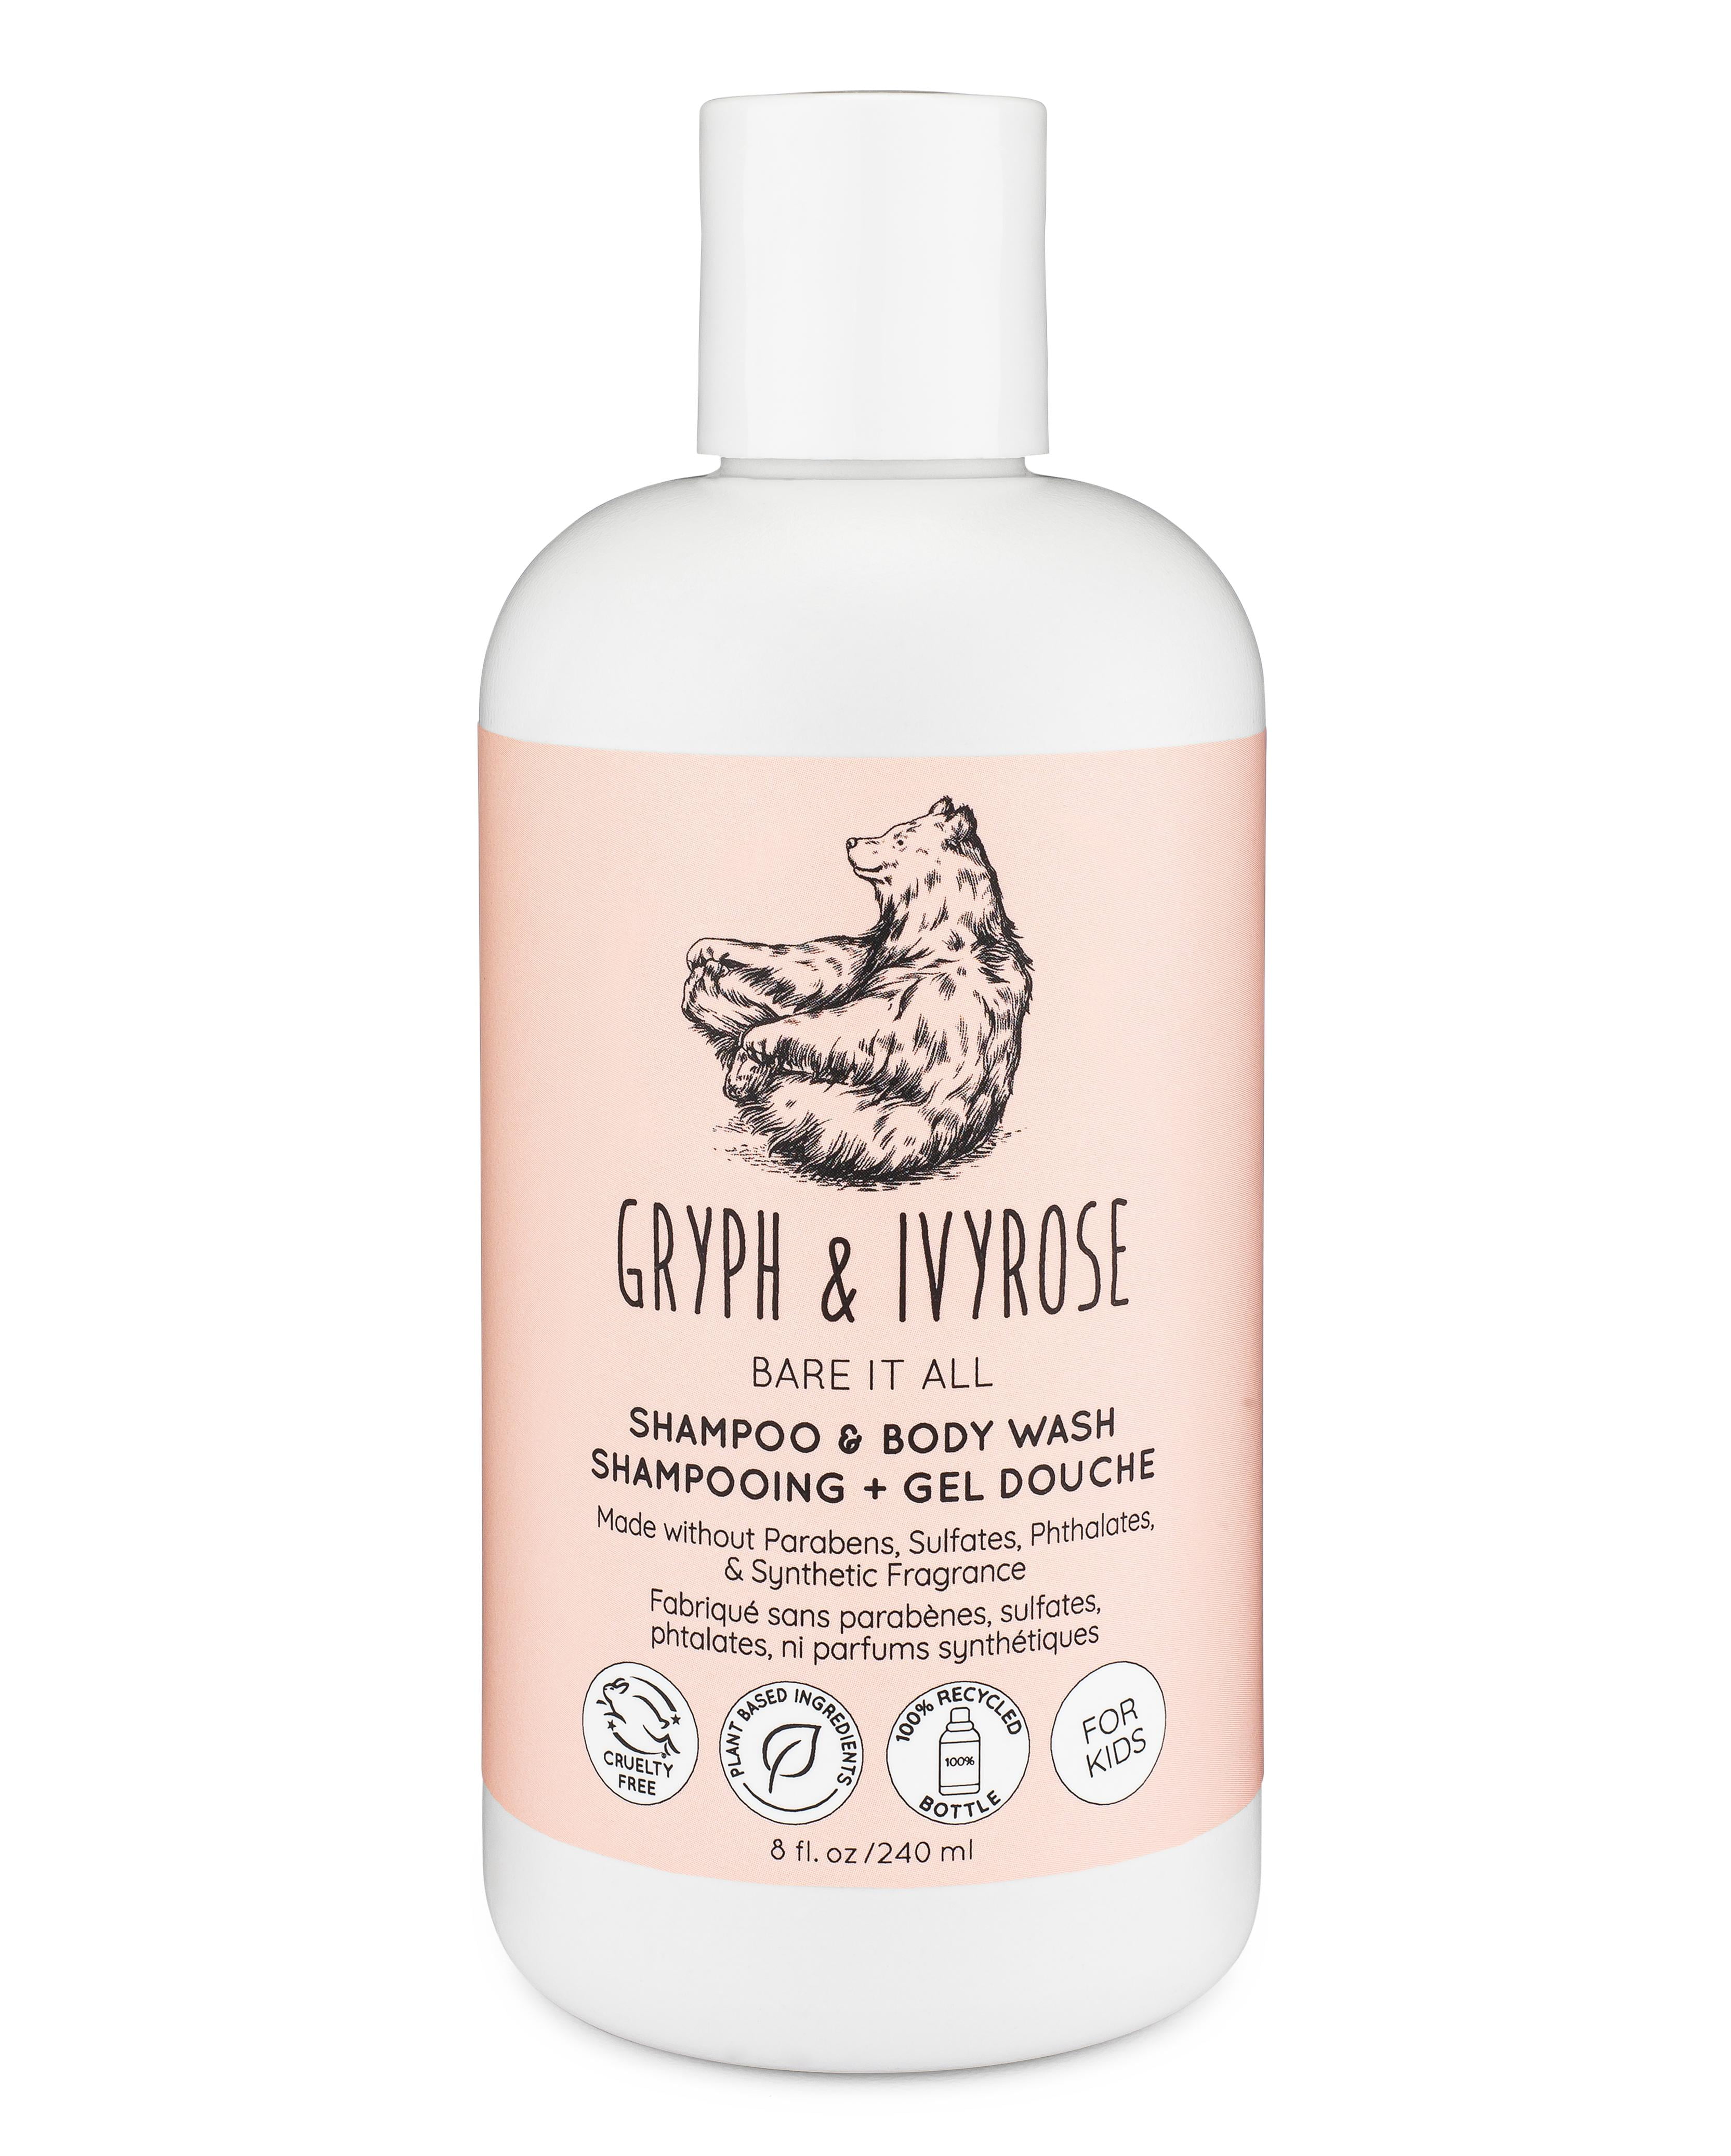 Gryph & IvyRose 2-in-1 Shampoo & Body Wash for Kids and Sensitive Skin - Bare It All - All Natural, Sustainable, Cruelty Free, Made with Non Synthetic Coconut Shea Fragrance. 8 Fl Oz.